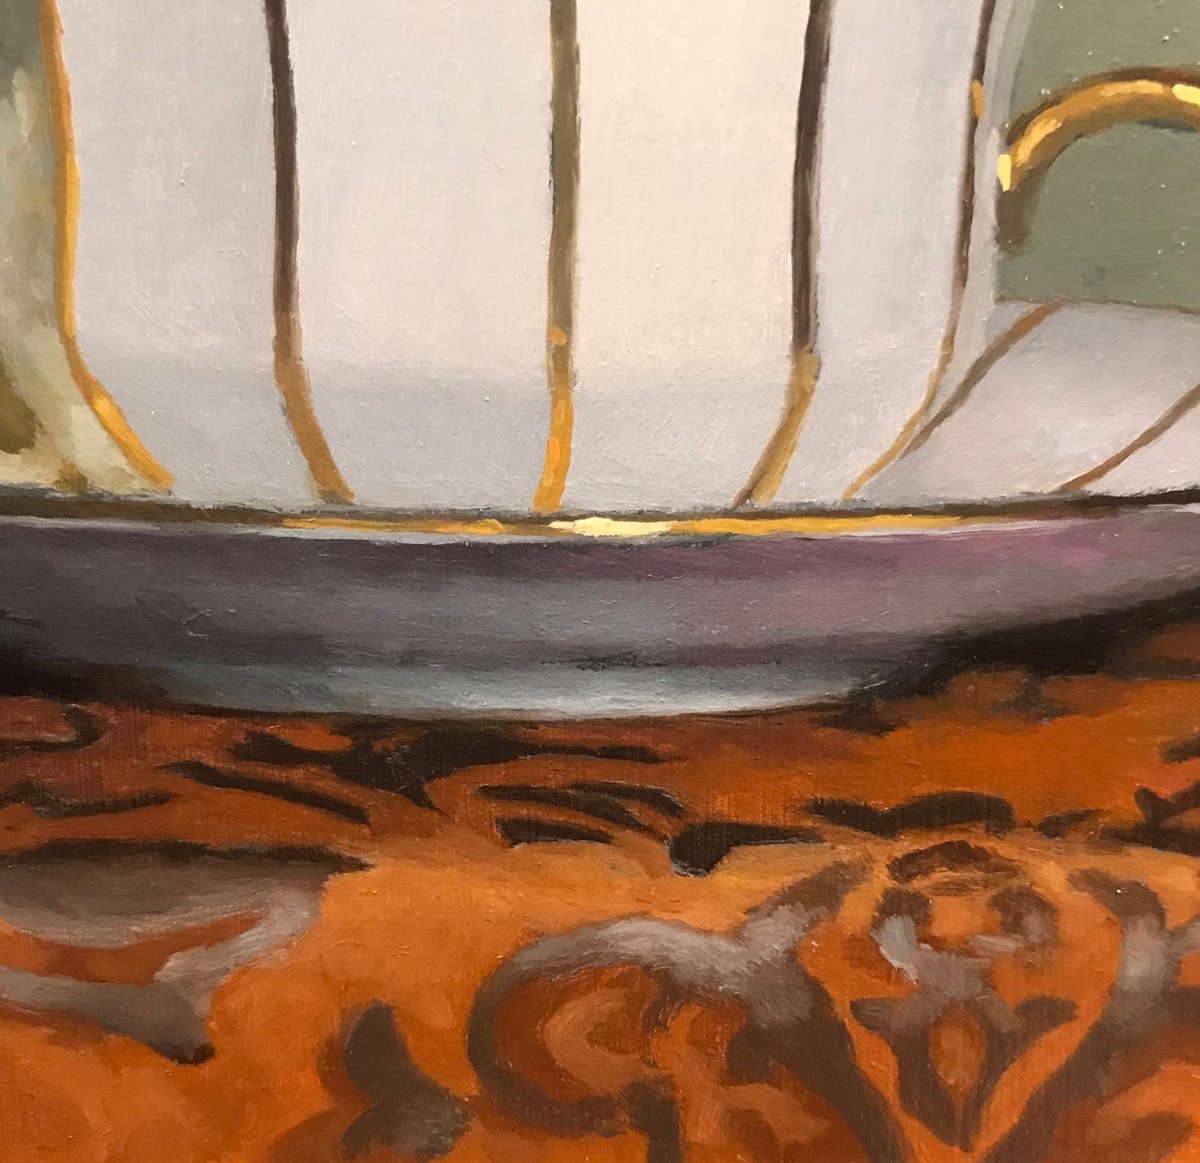 Some highlights on a teacup saucer from a larger painting